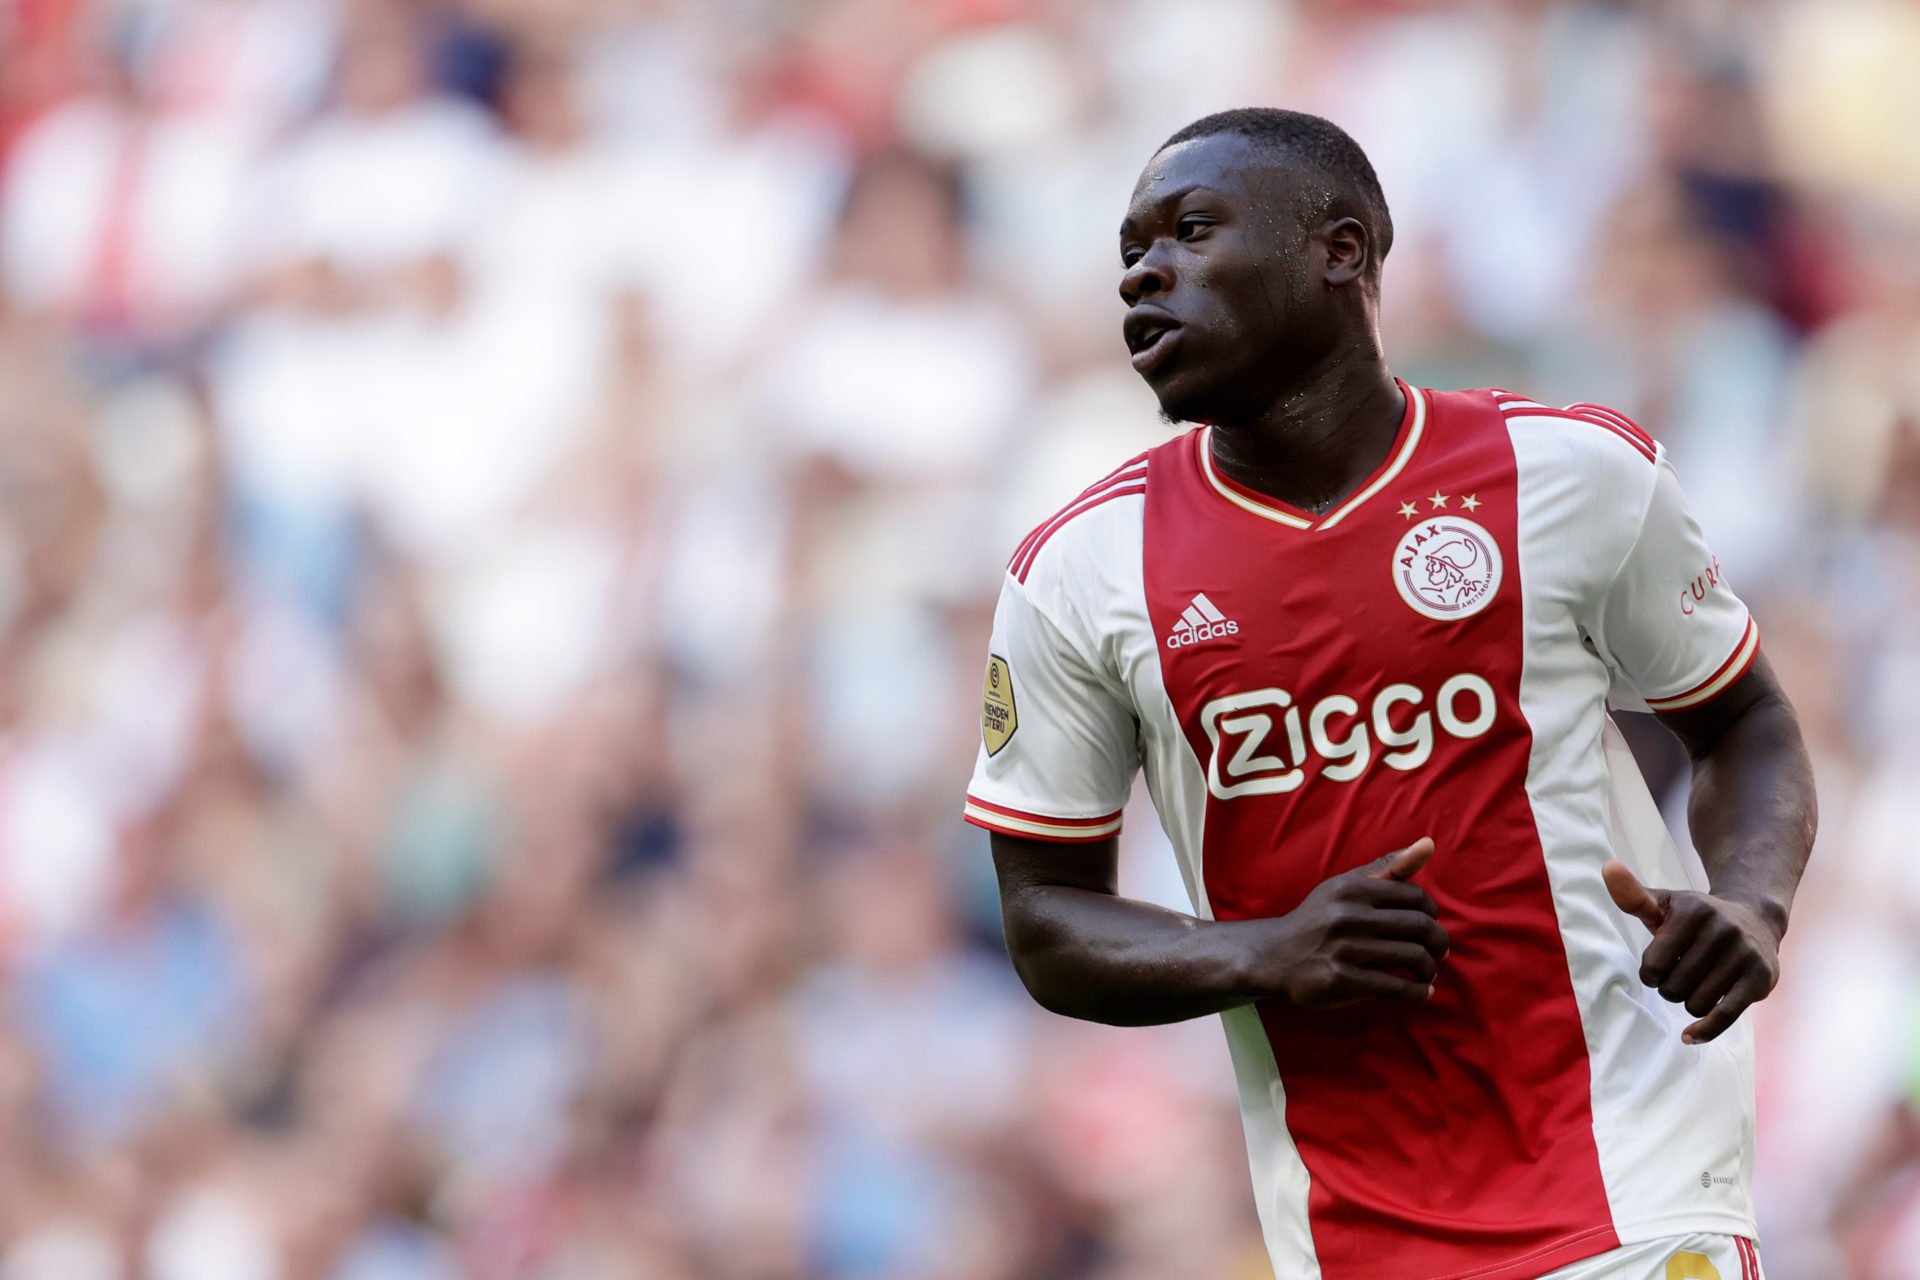 Ajax Star Says He Plans To Watch A Lot Of Manchester United And Wants To Play For Club In The Future United In Focus